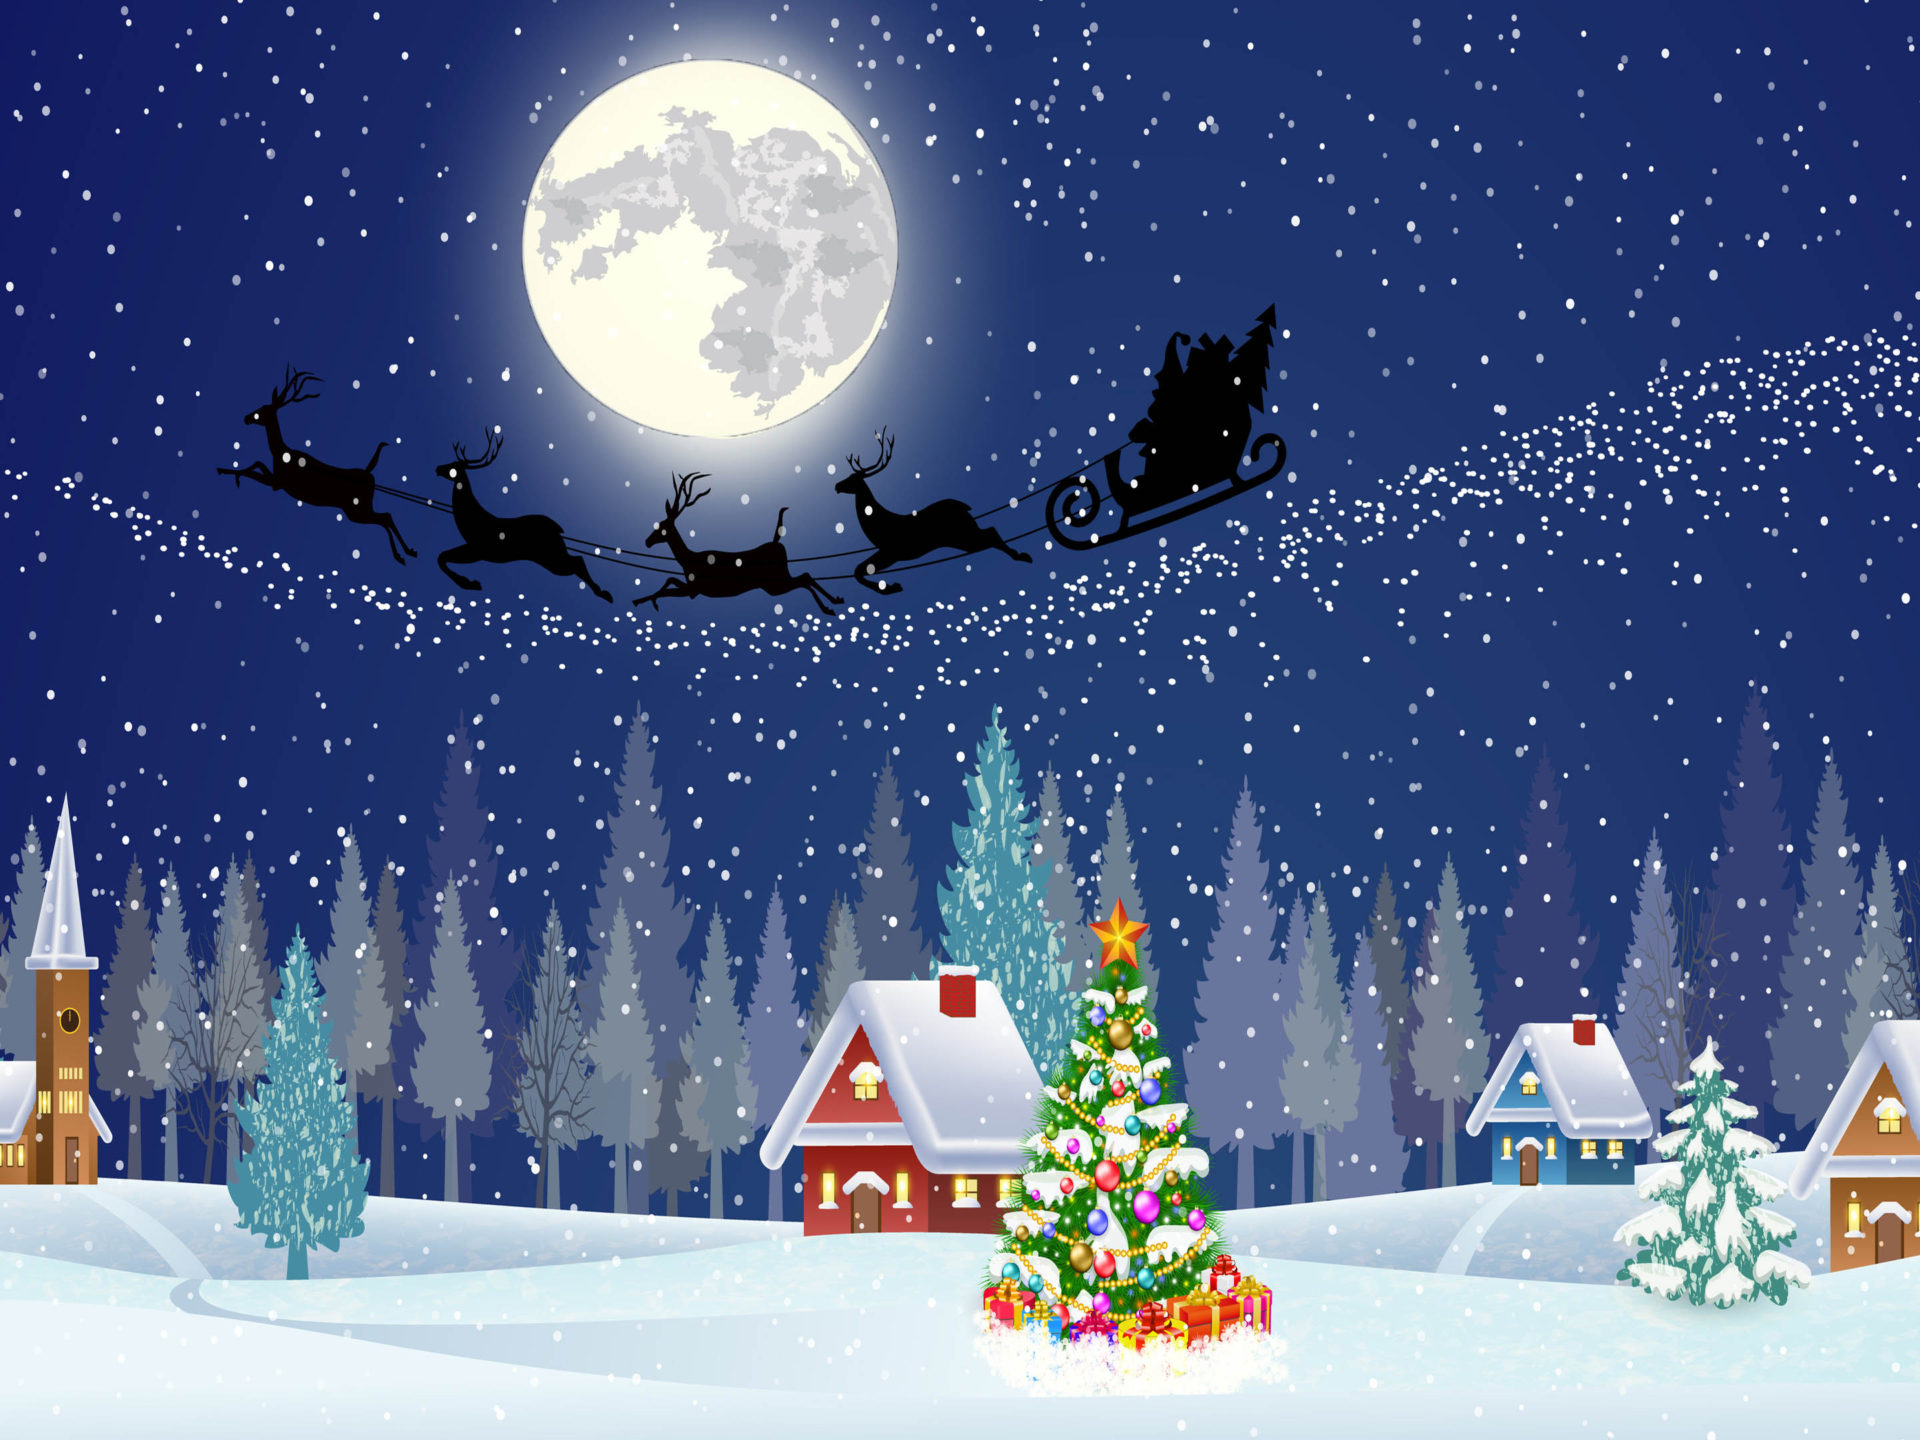 Merry Christmas And Happy New Year New Year Christmas Tree And Night Village Wallpaper HD, Wallpaper13.com